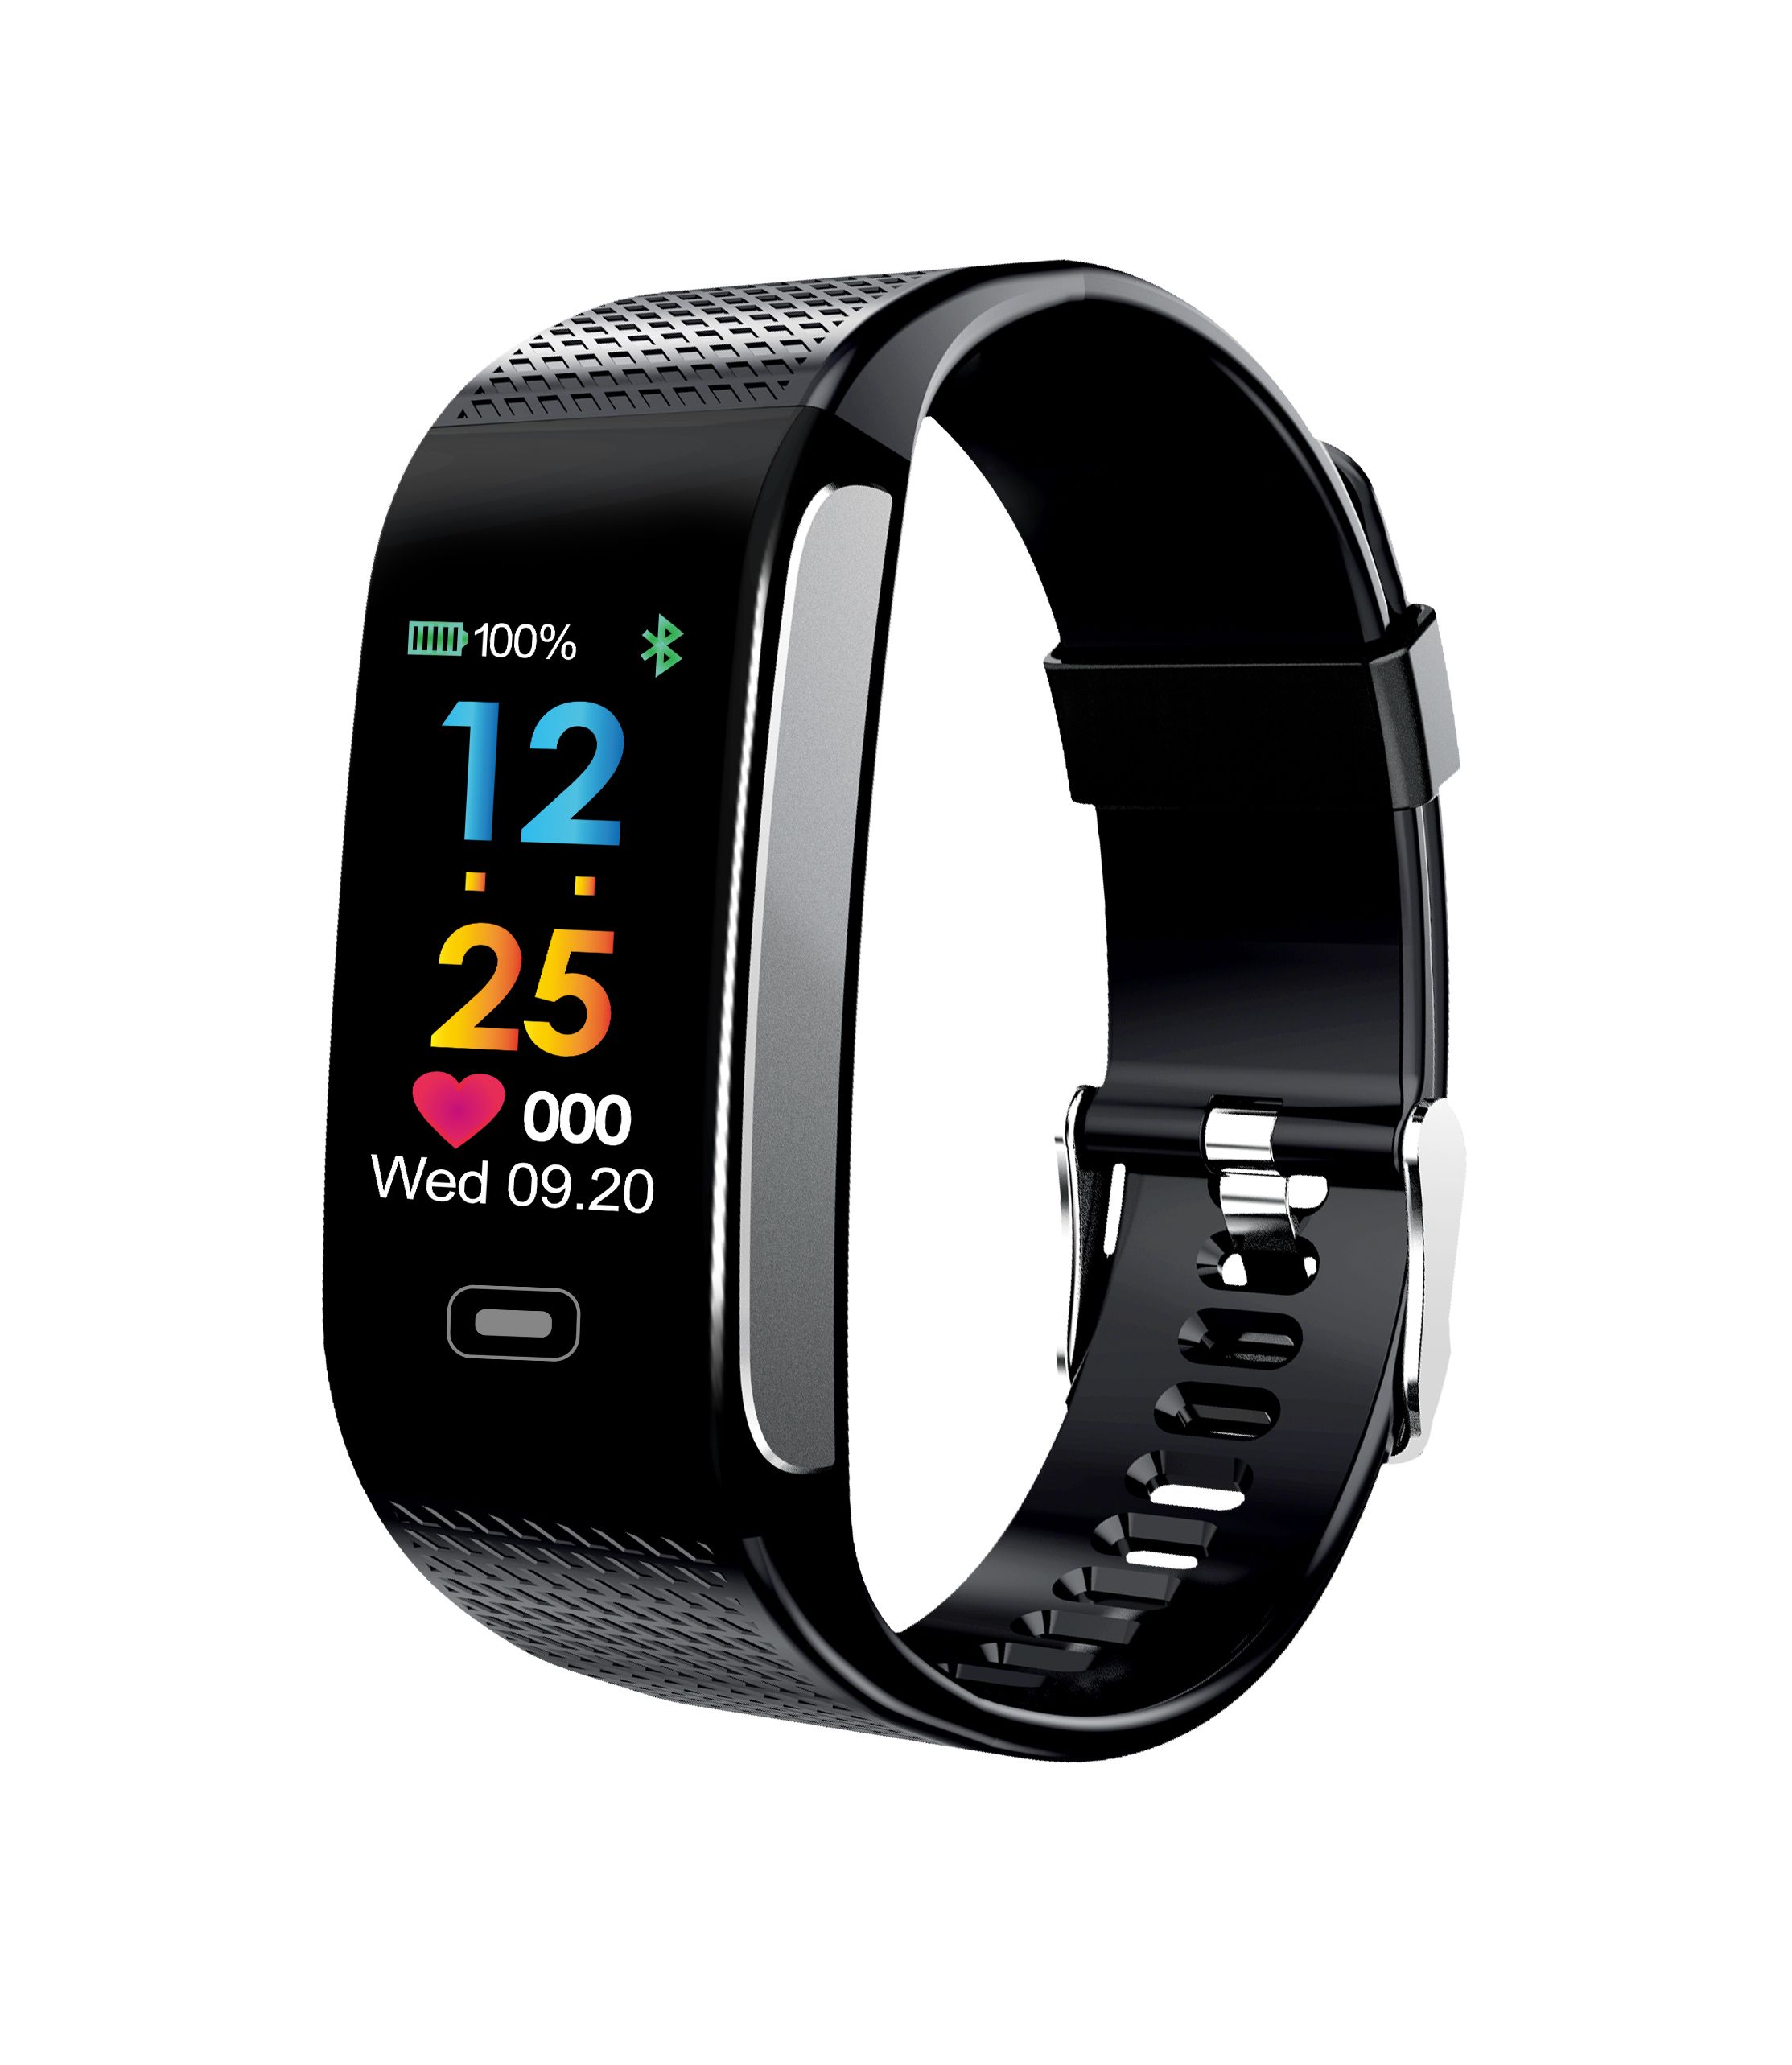  Best Fitness Tracker No Smartphone for Fat Body